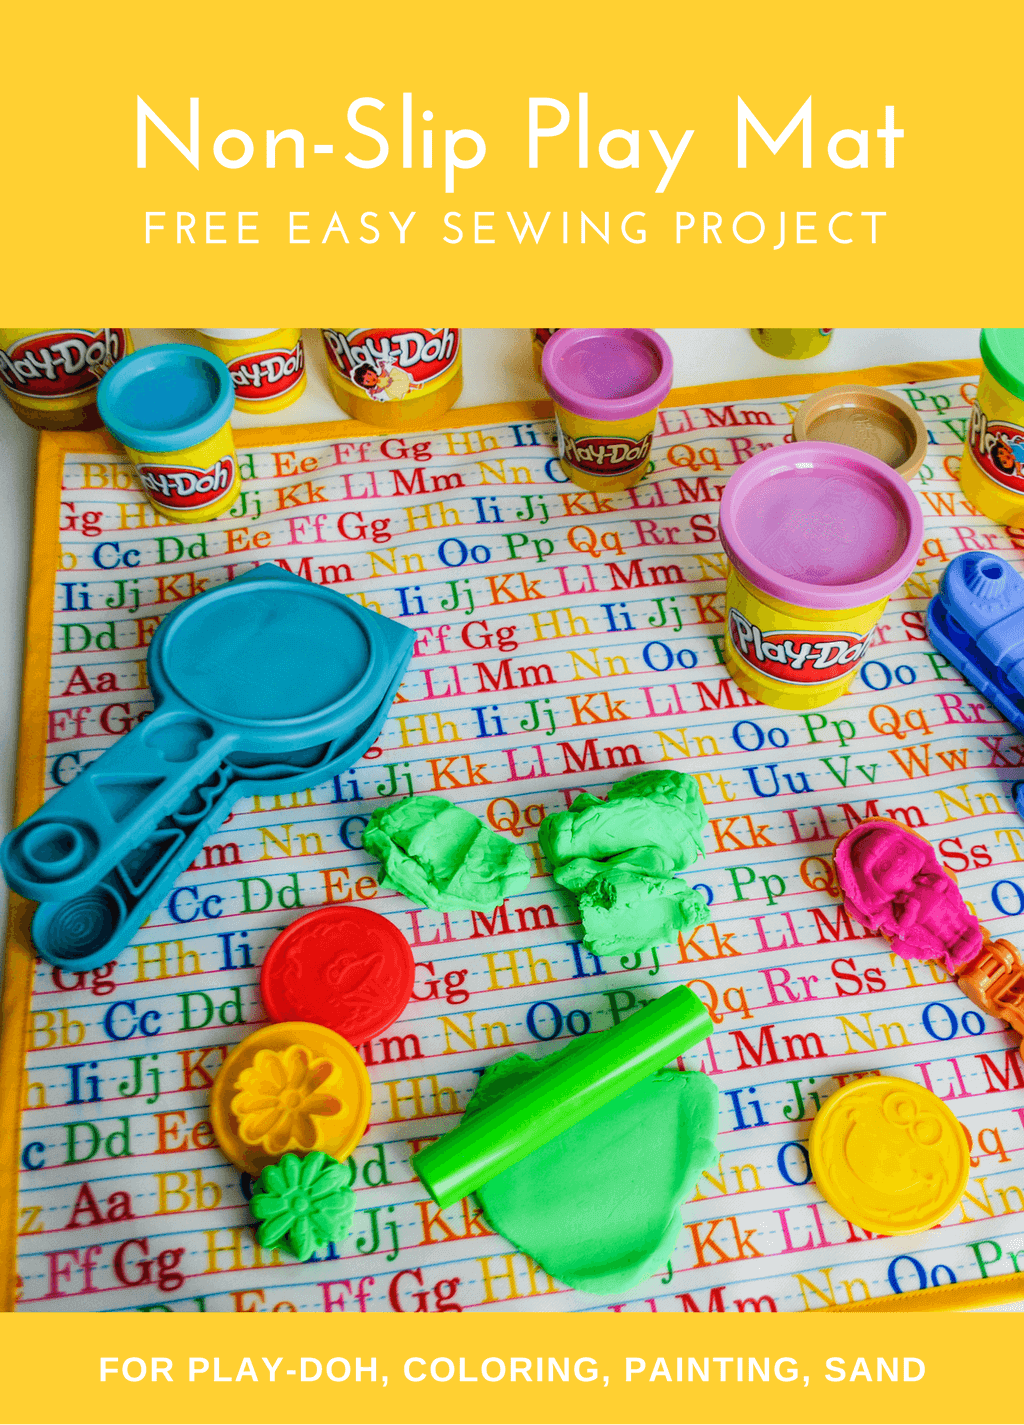 Non-slip play mat sewing pattern - messy mat for kids